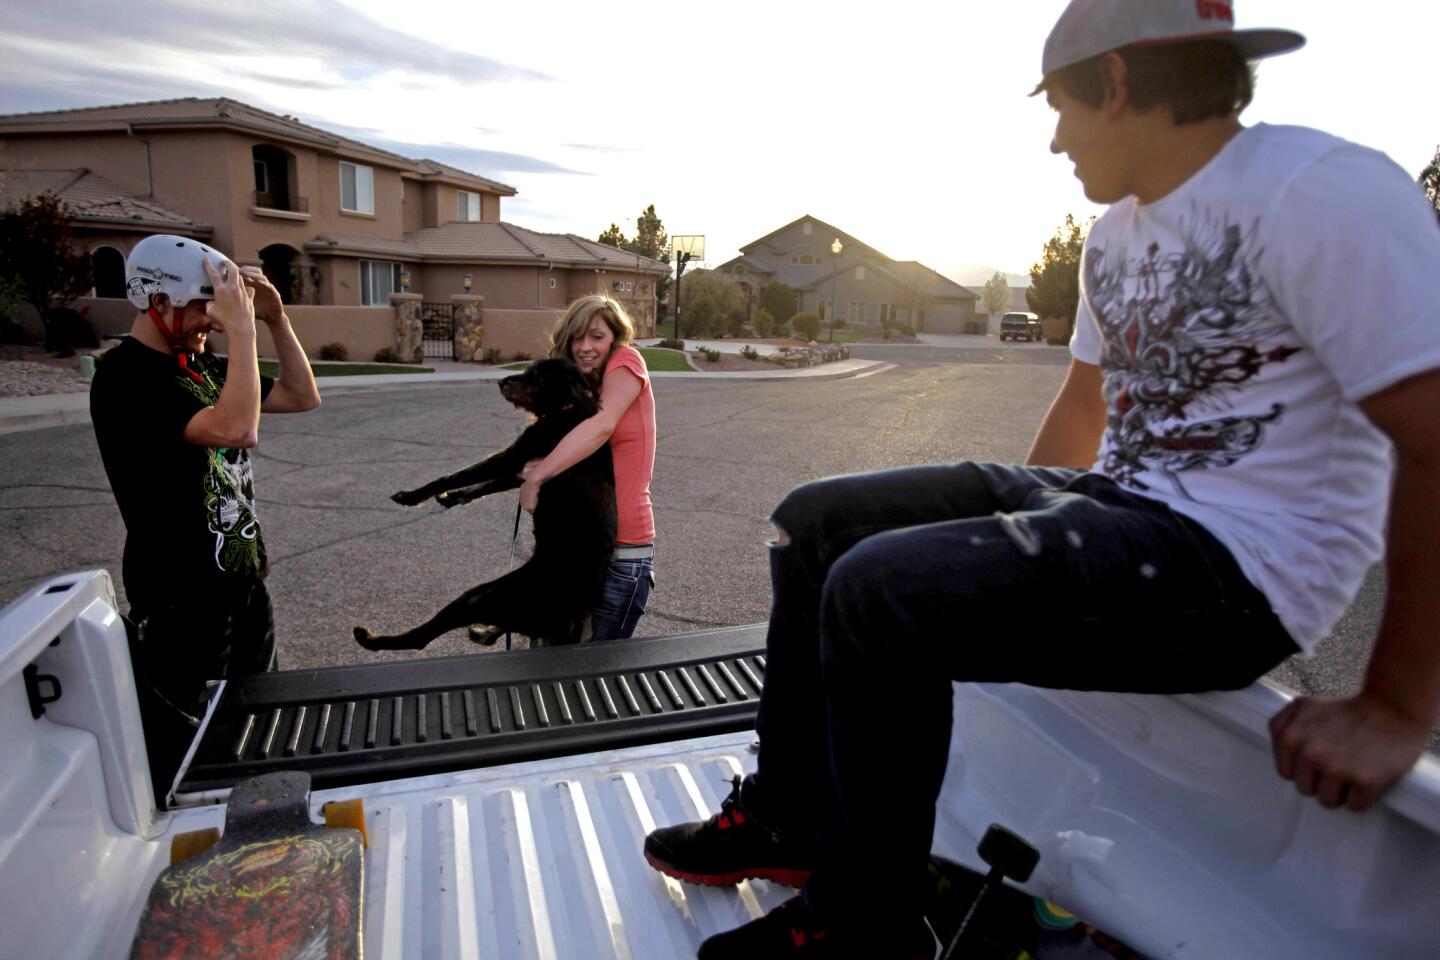 Zach Bowers, 18, left, and his half-brother Isaiah, 17, with their older brother Caleb's fiancee, Paige Siler, and the family dog. The young men have left their nearby polygamist compound in Arizona.